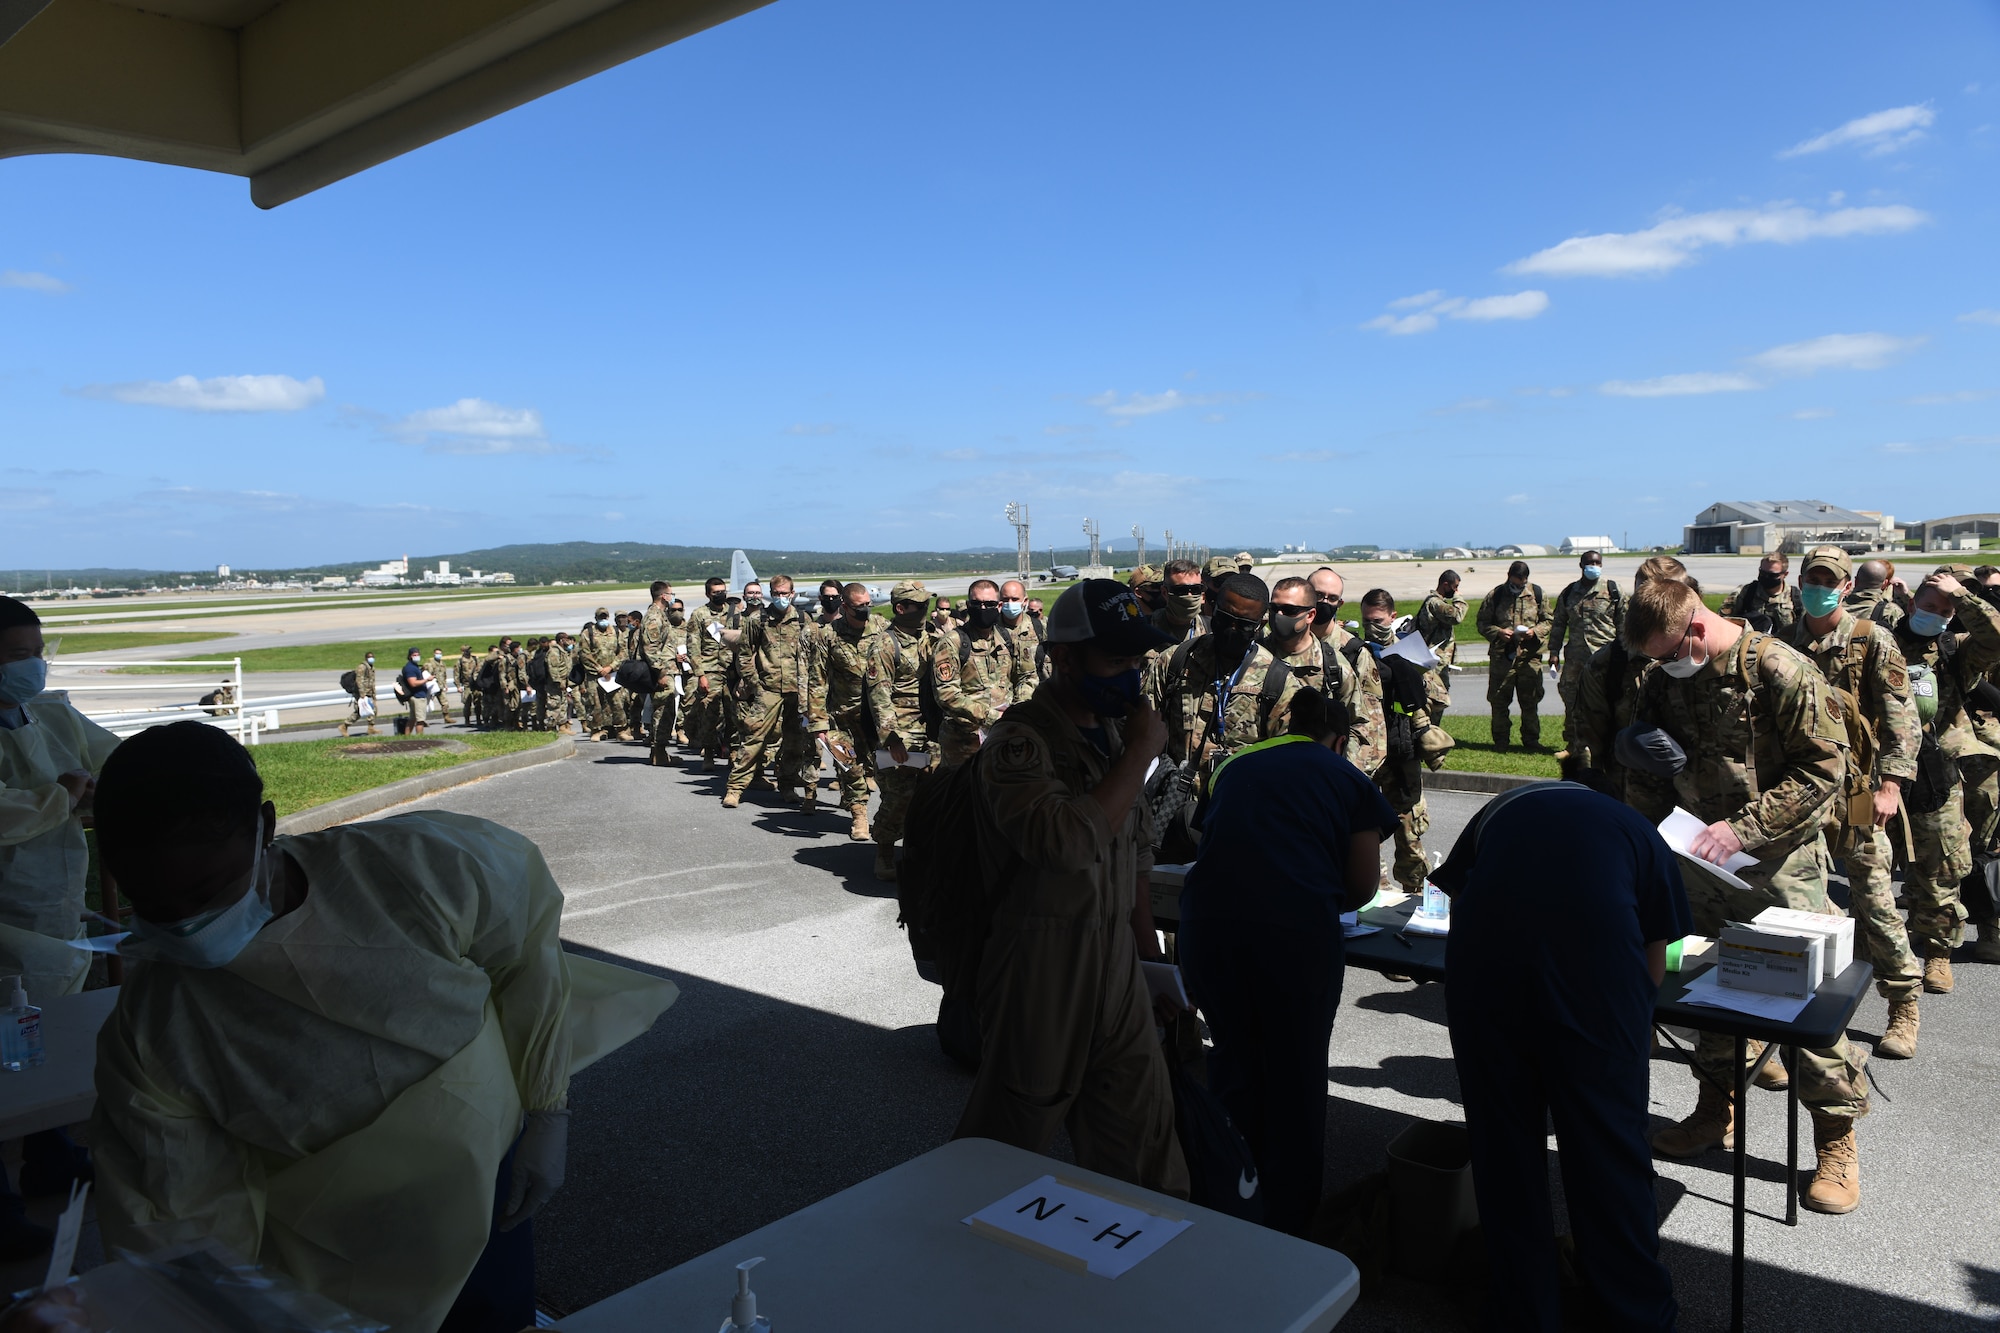 Airmen from the 18th Wing in-process after returning from a deployment to U.S. Central Command Oct. 6, 2020, at Kadena Air Base, Japan. More than 300 Airmen assigned to the 18th Operations and Maintenance Groups as well as pilots and aircraft assigned to the 44th Fighter Squadron deployed to the CENTCOM theater to defend U.S. and partner nation interests. During their deployment, Airmen conducted more than 1,000 sorties and 5,300 combat hours, which drove 13 phase inspections in six months. They’ll share the skills they learned in combat with Team Kadena, joint partners and allies to ensure a free and open Indo-Pacific. (U.S. Air Force photo by Tech. Sgt. Benjamin Sutton)